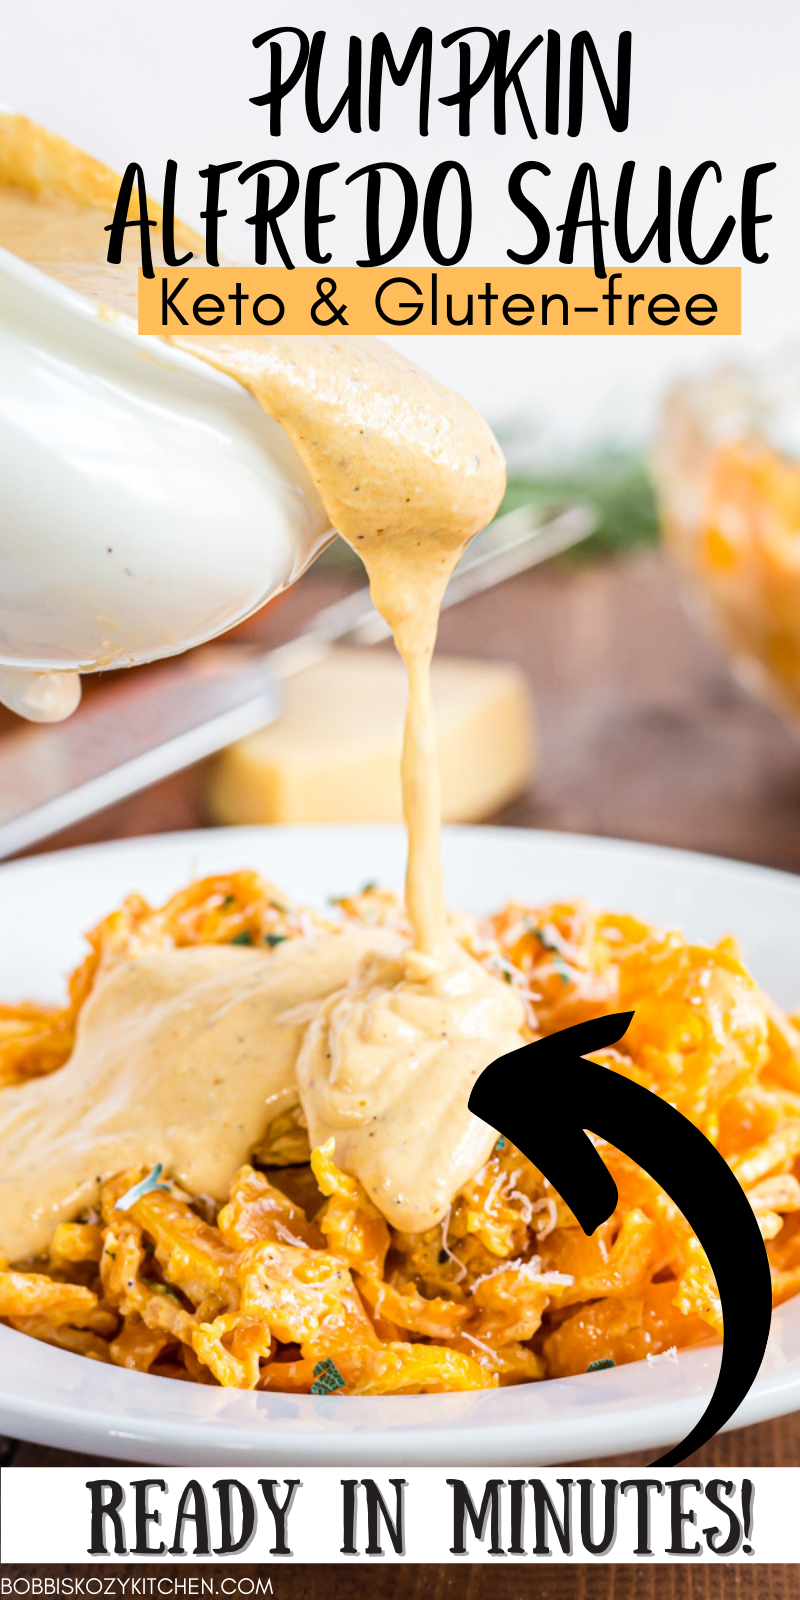 Pumpkin Alfredo Sauce - This Pumpkin Alfredo Sauce is an easy weeknight dish with a few ingredients, is done in less than 20 minutes, plus it is low carb and gluten-free! #pumpkin #lowcarb #alfredo #sauce #keto #glutenfree #recipe